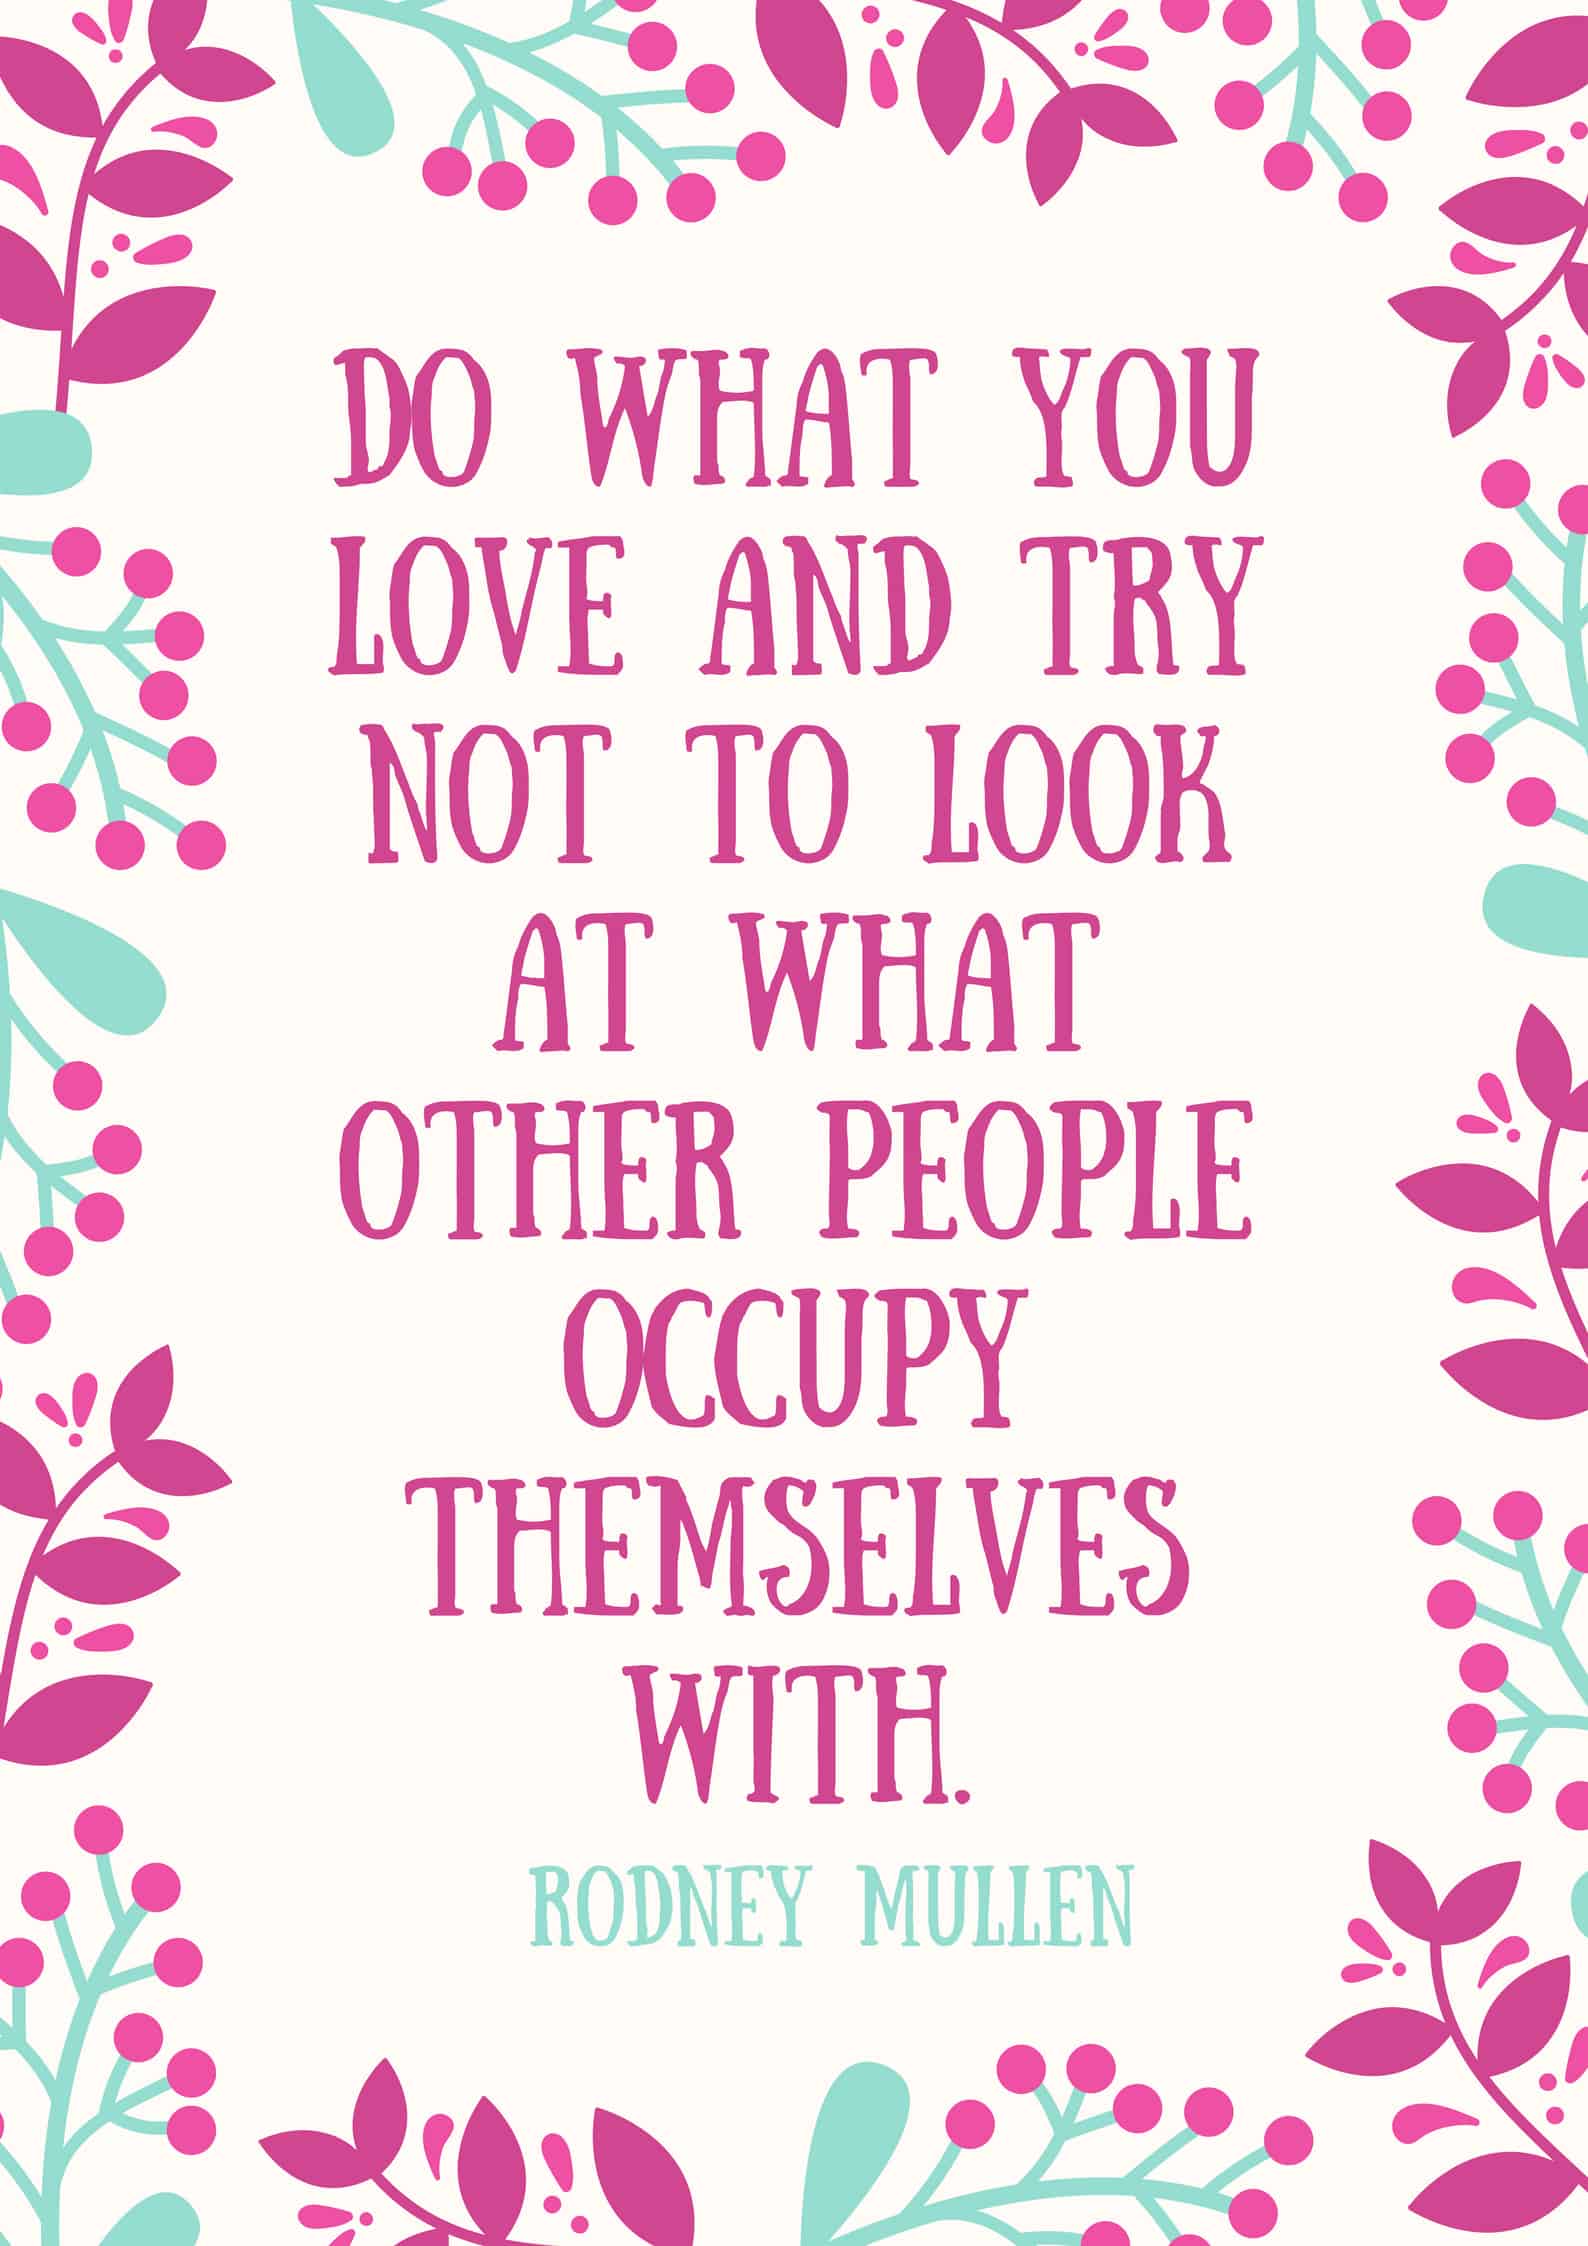 Do what you love and try not to look at what other people occupy themselves with.